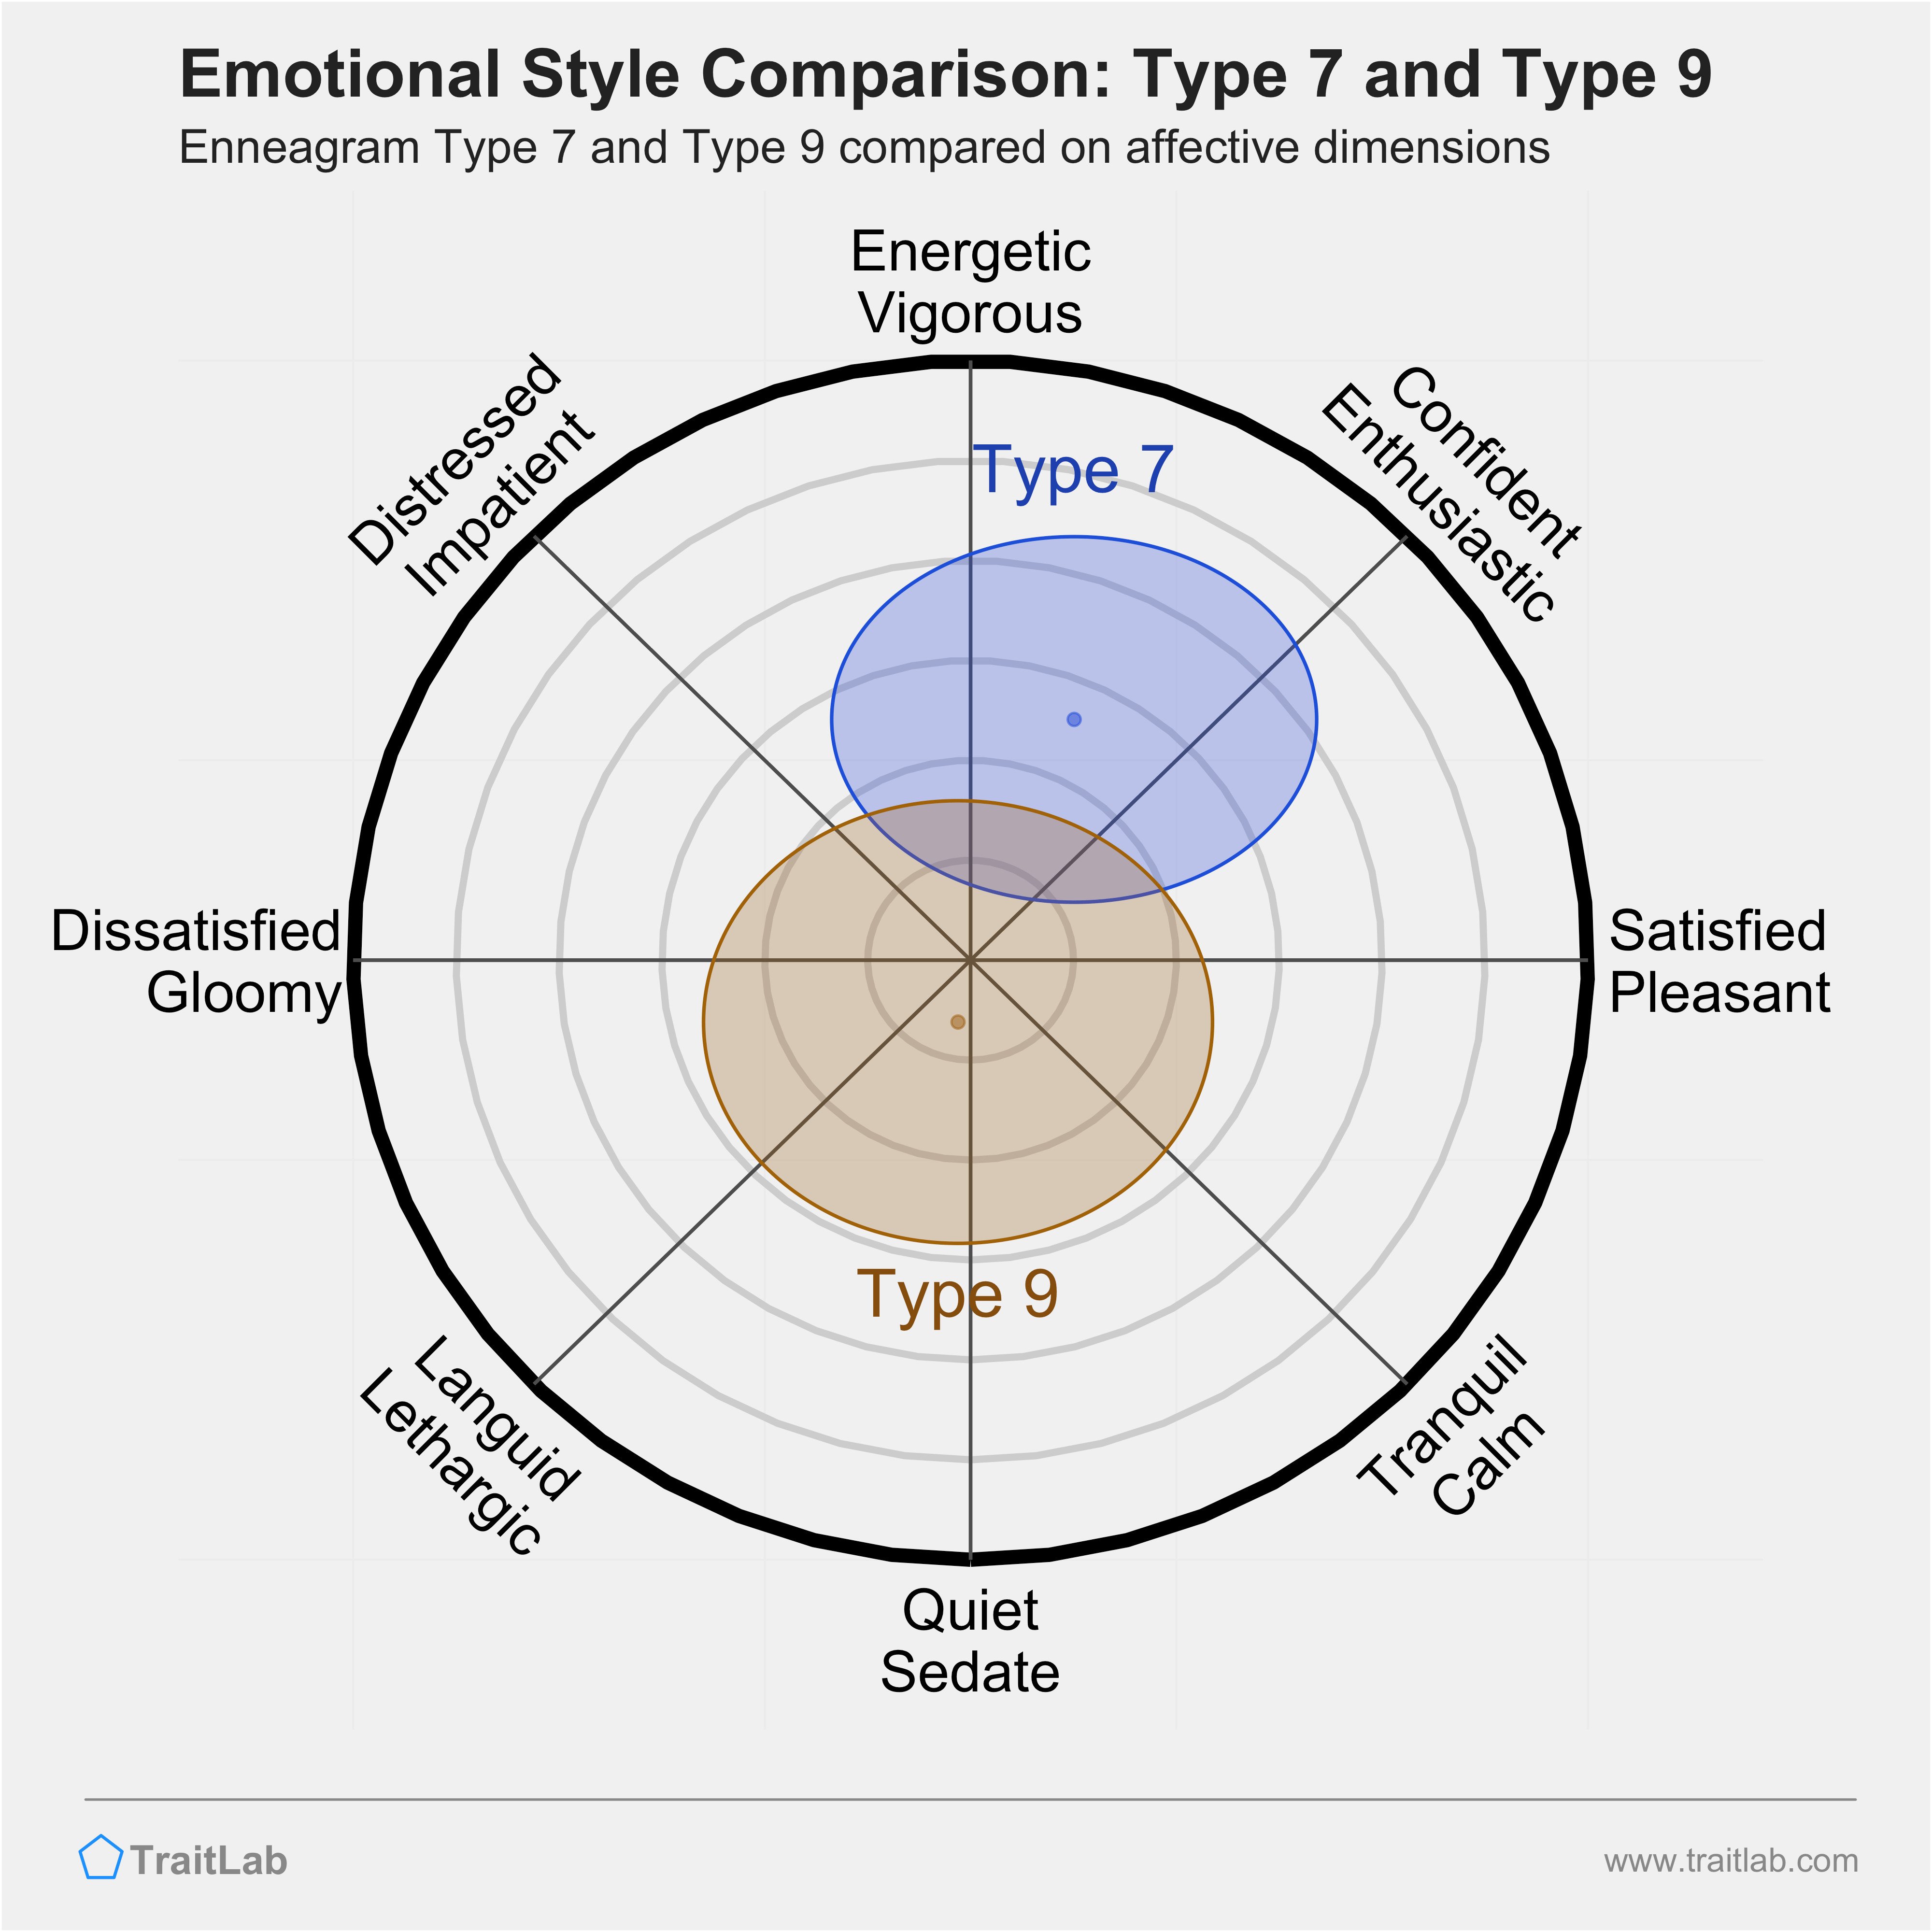 Type 7 and Type 9 comparison across emotional (affective) dimensions